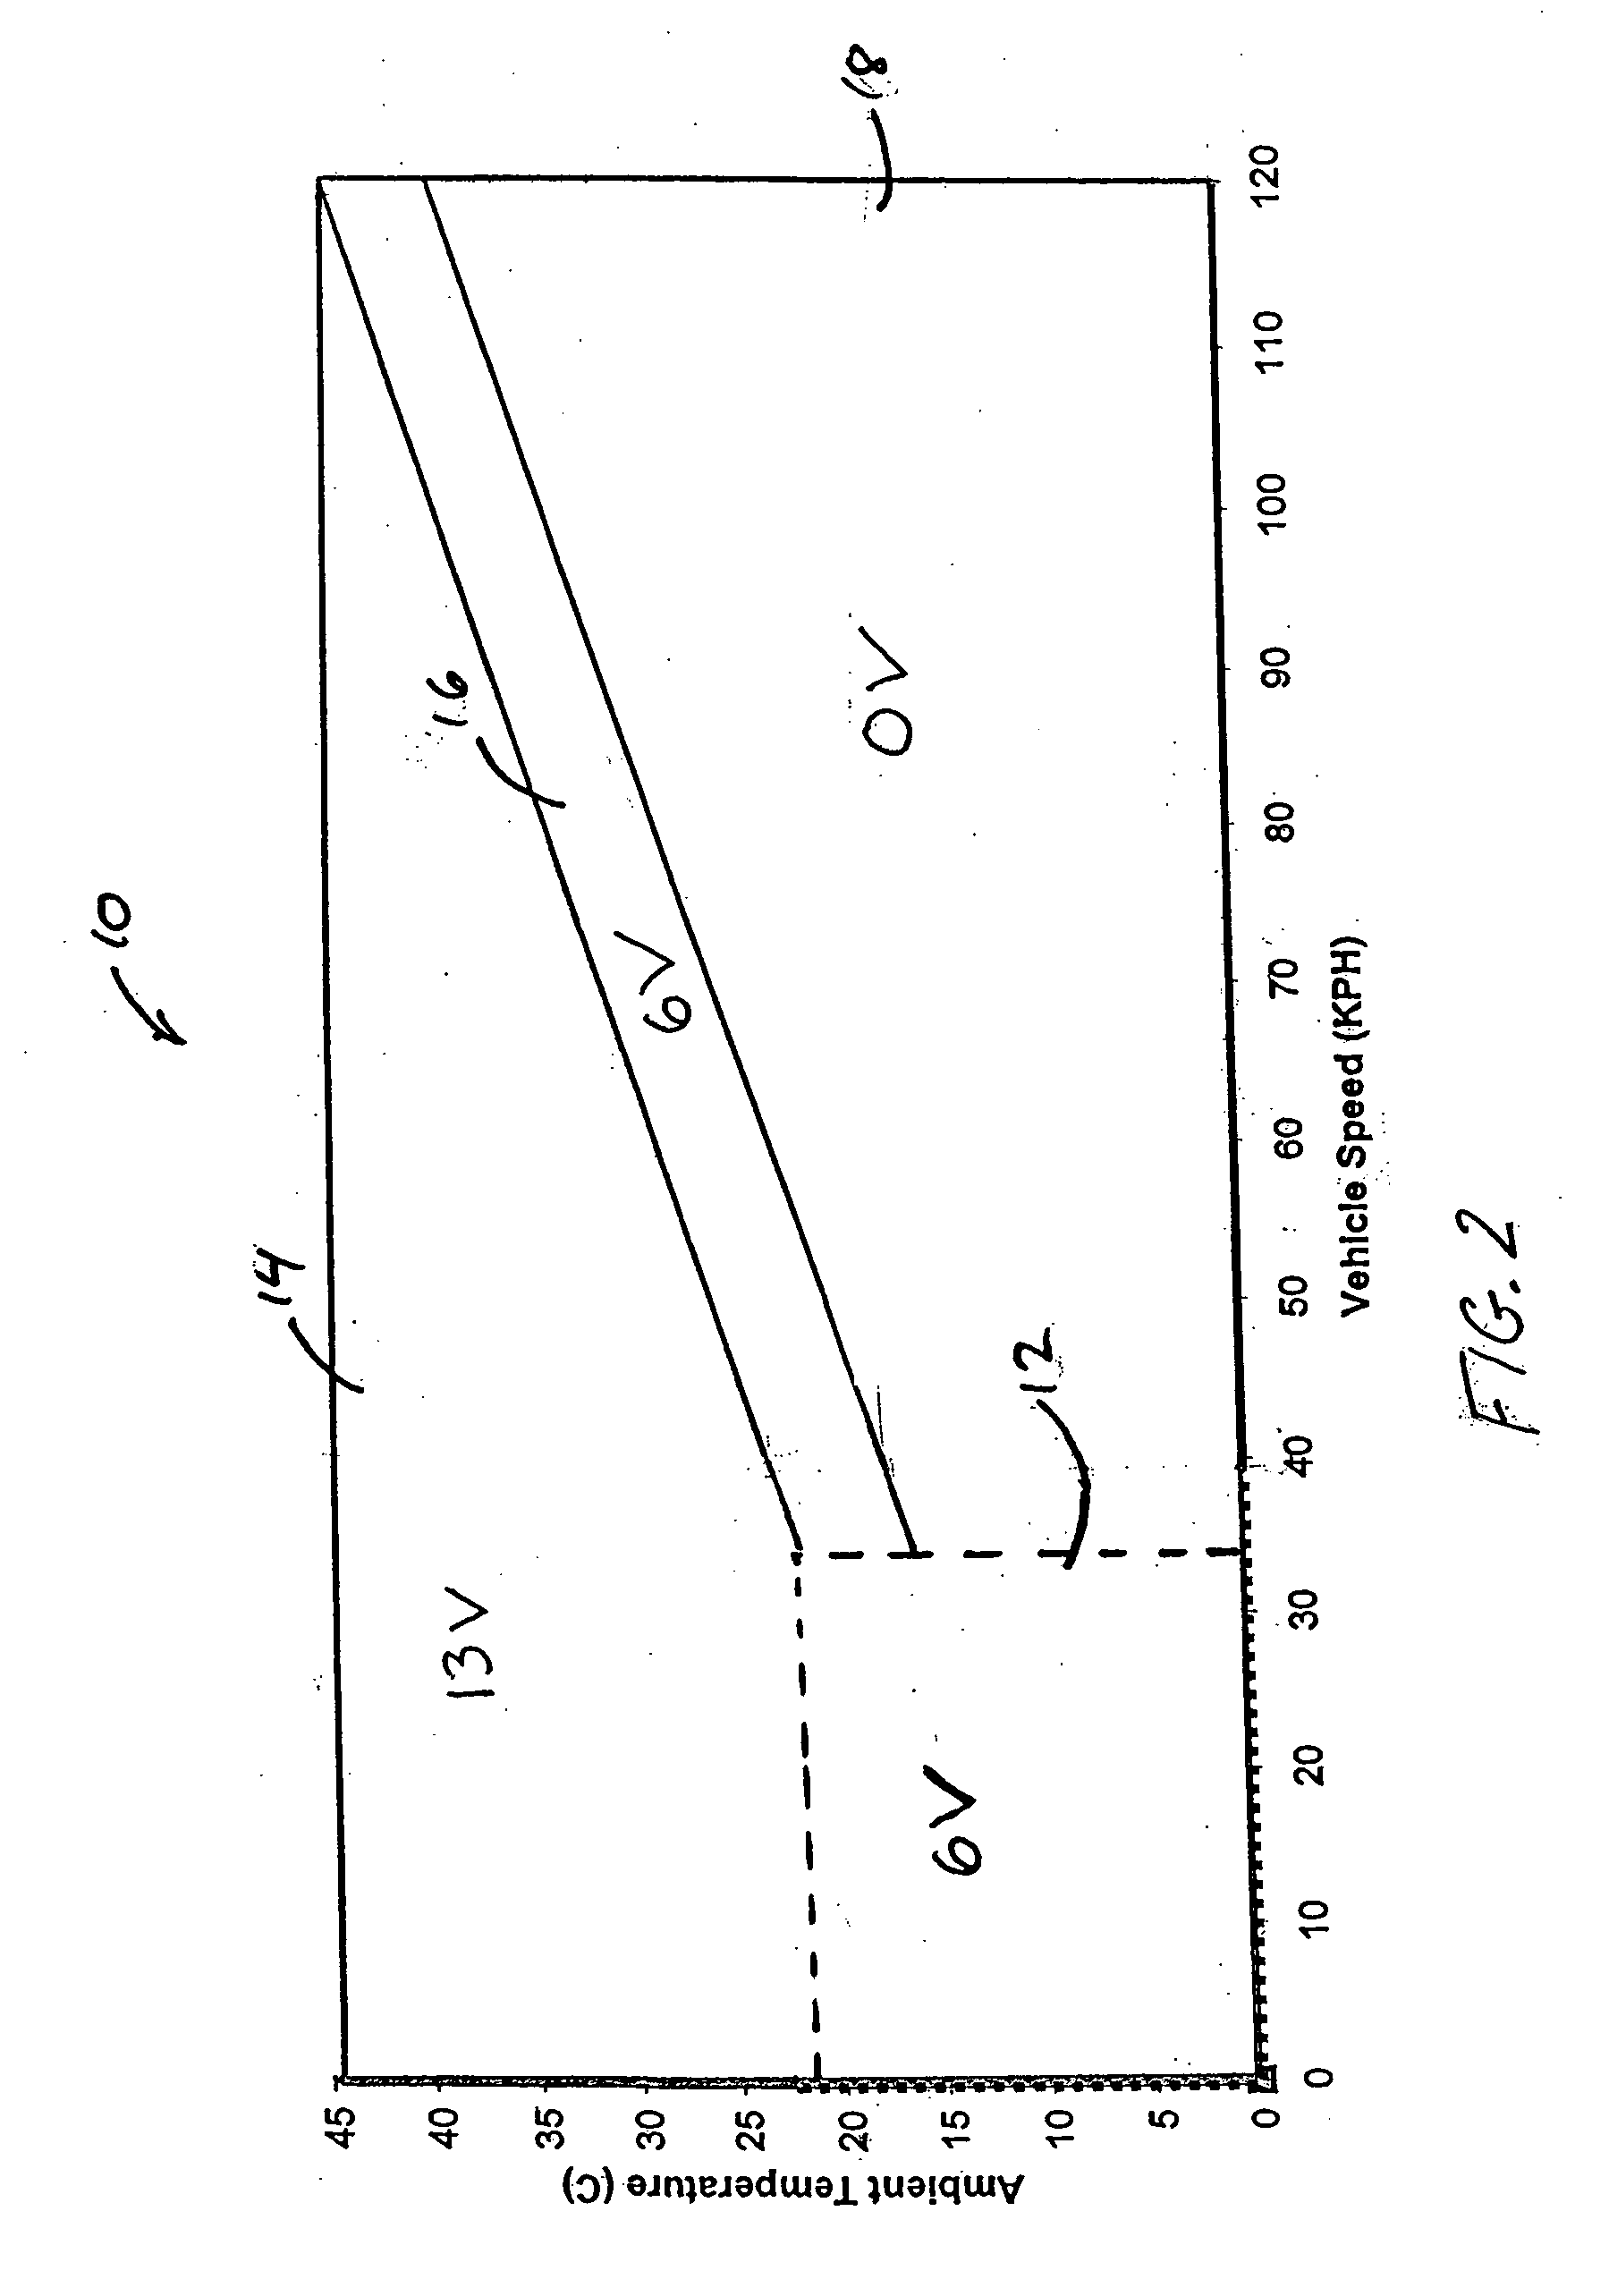 Speed and system pressure control for cooling fan